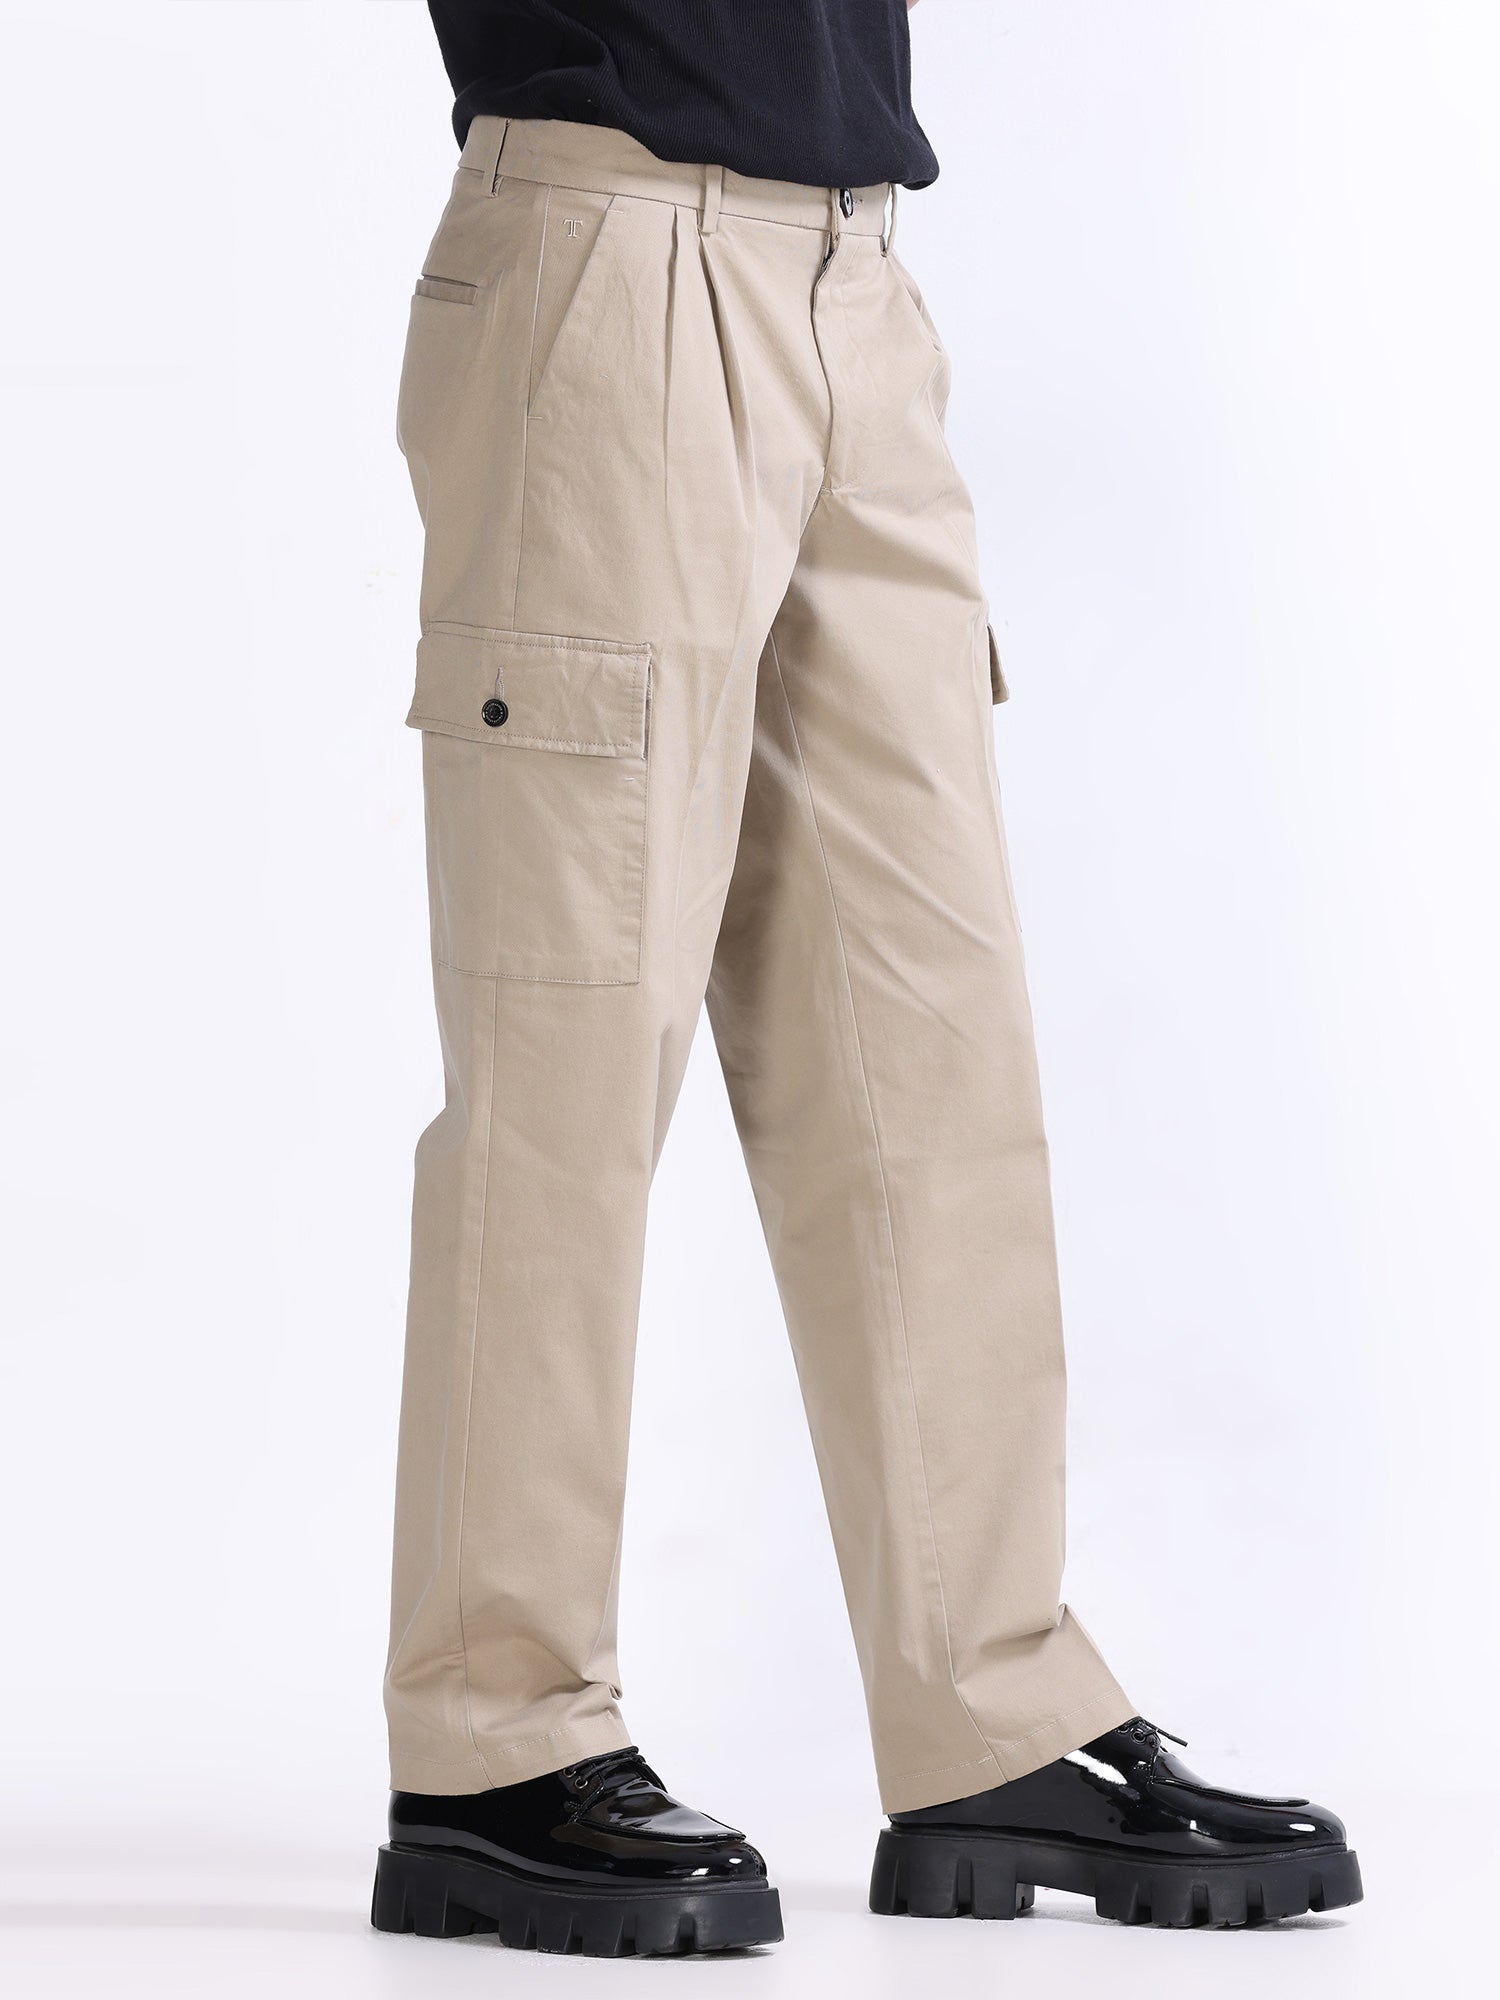 Men's pants grey 28|Custom Made Pants - Online in India | Bow & Square